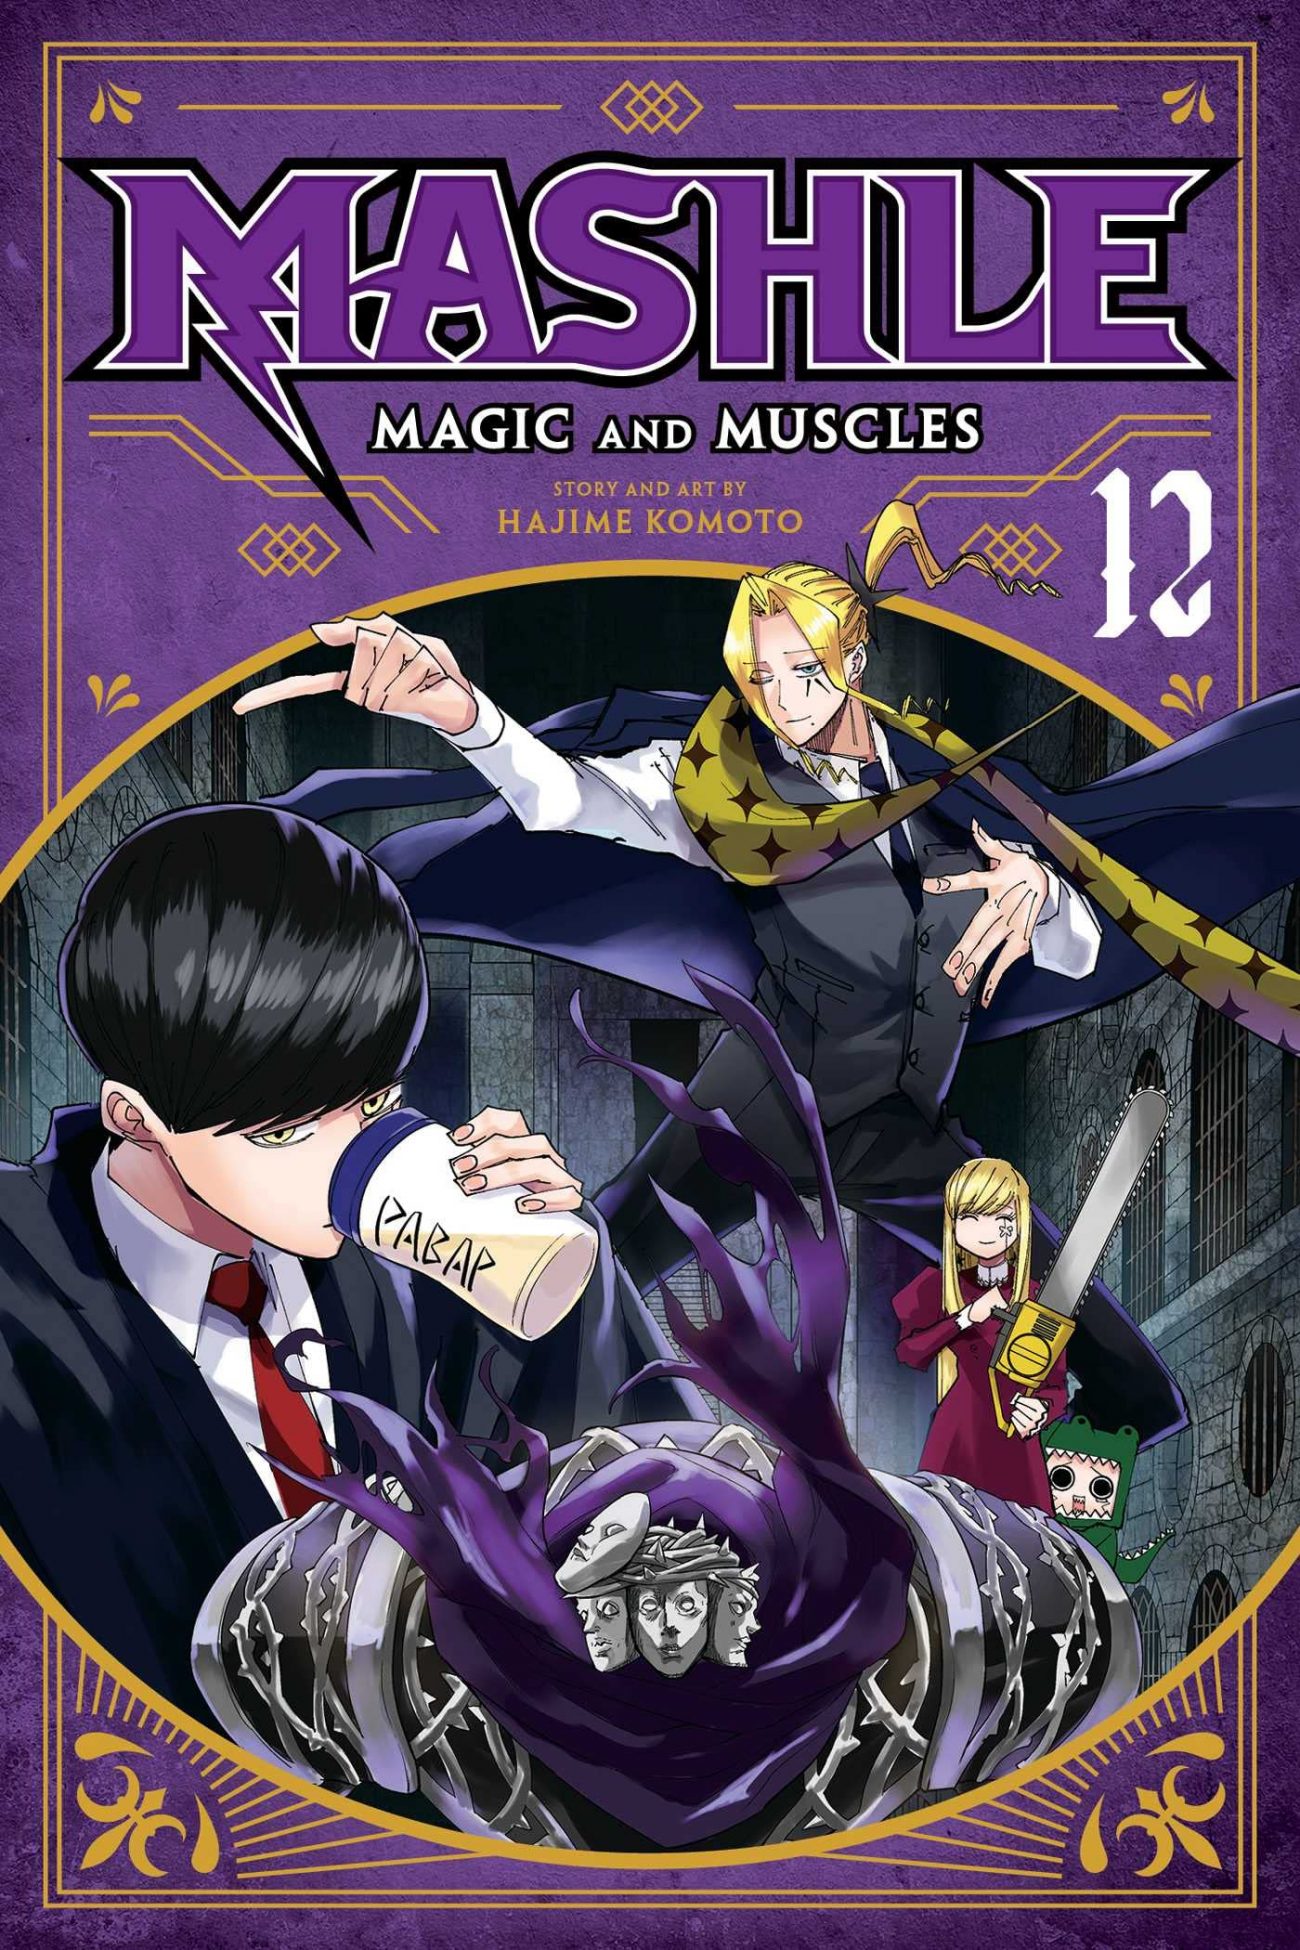 Mashle: Magic and Muscles is listed for 12 episodes long : r/anime